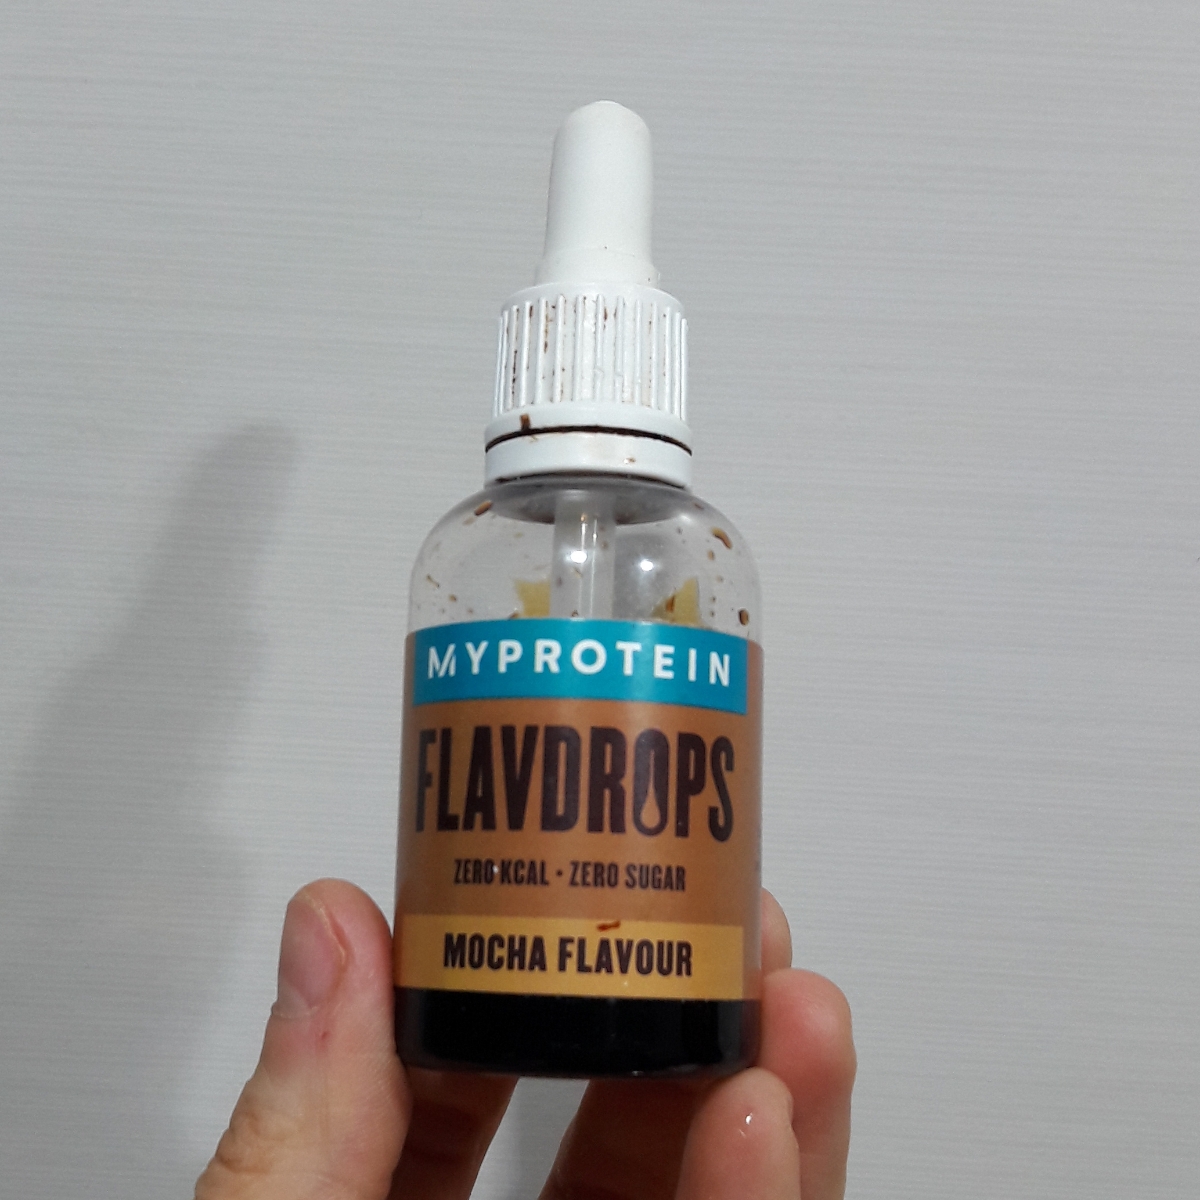 Myprotein Flavdrops Review